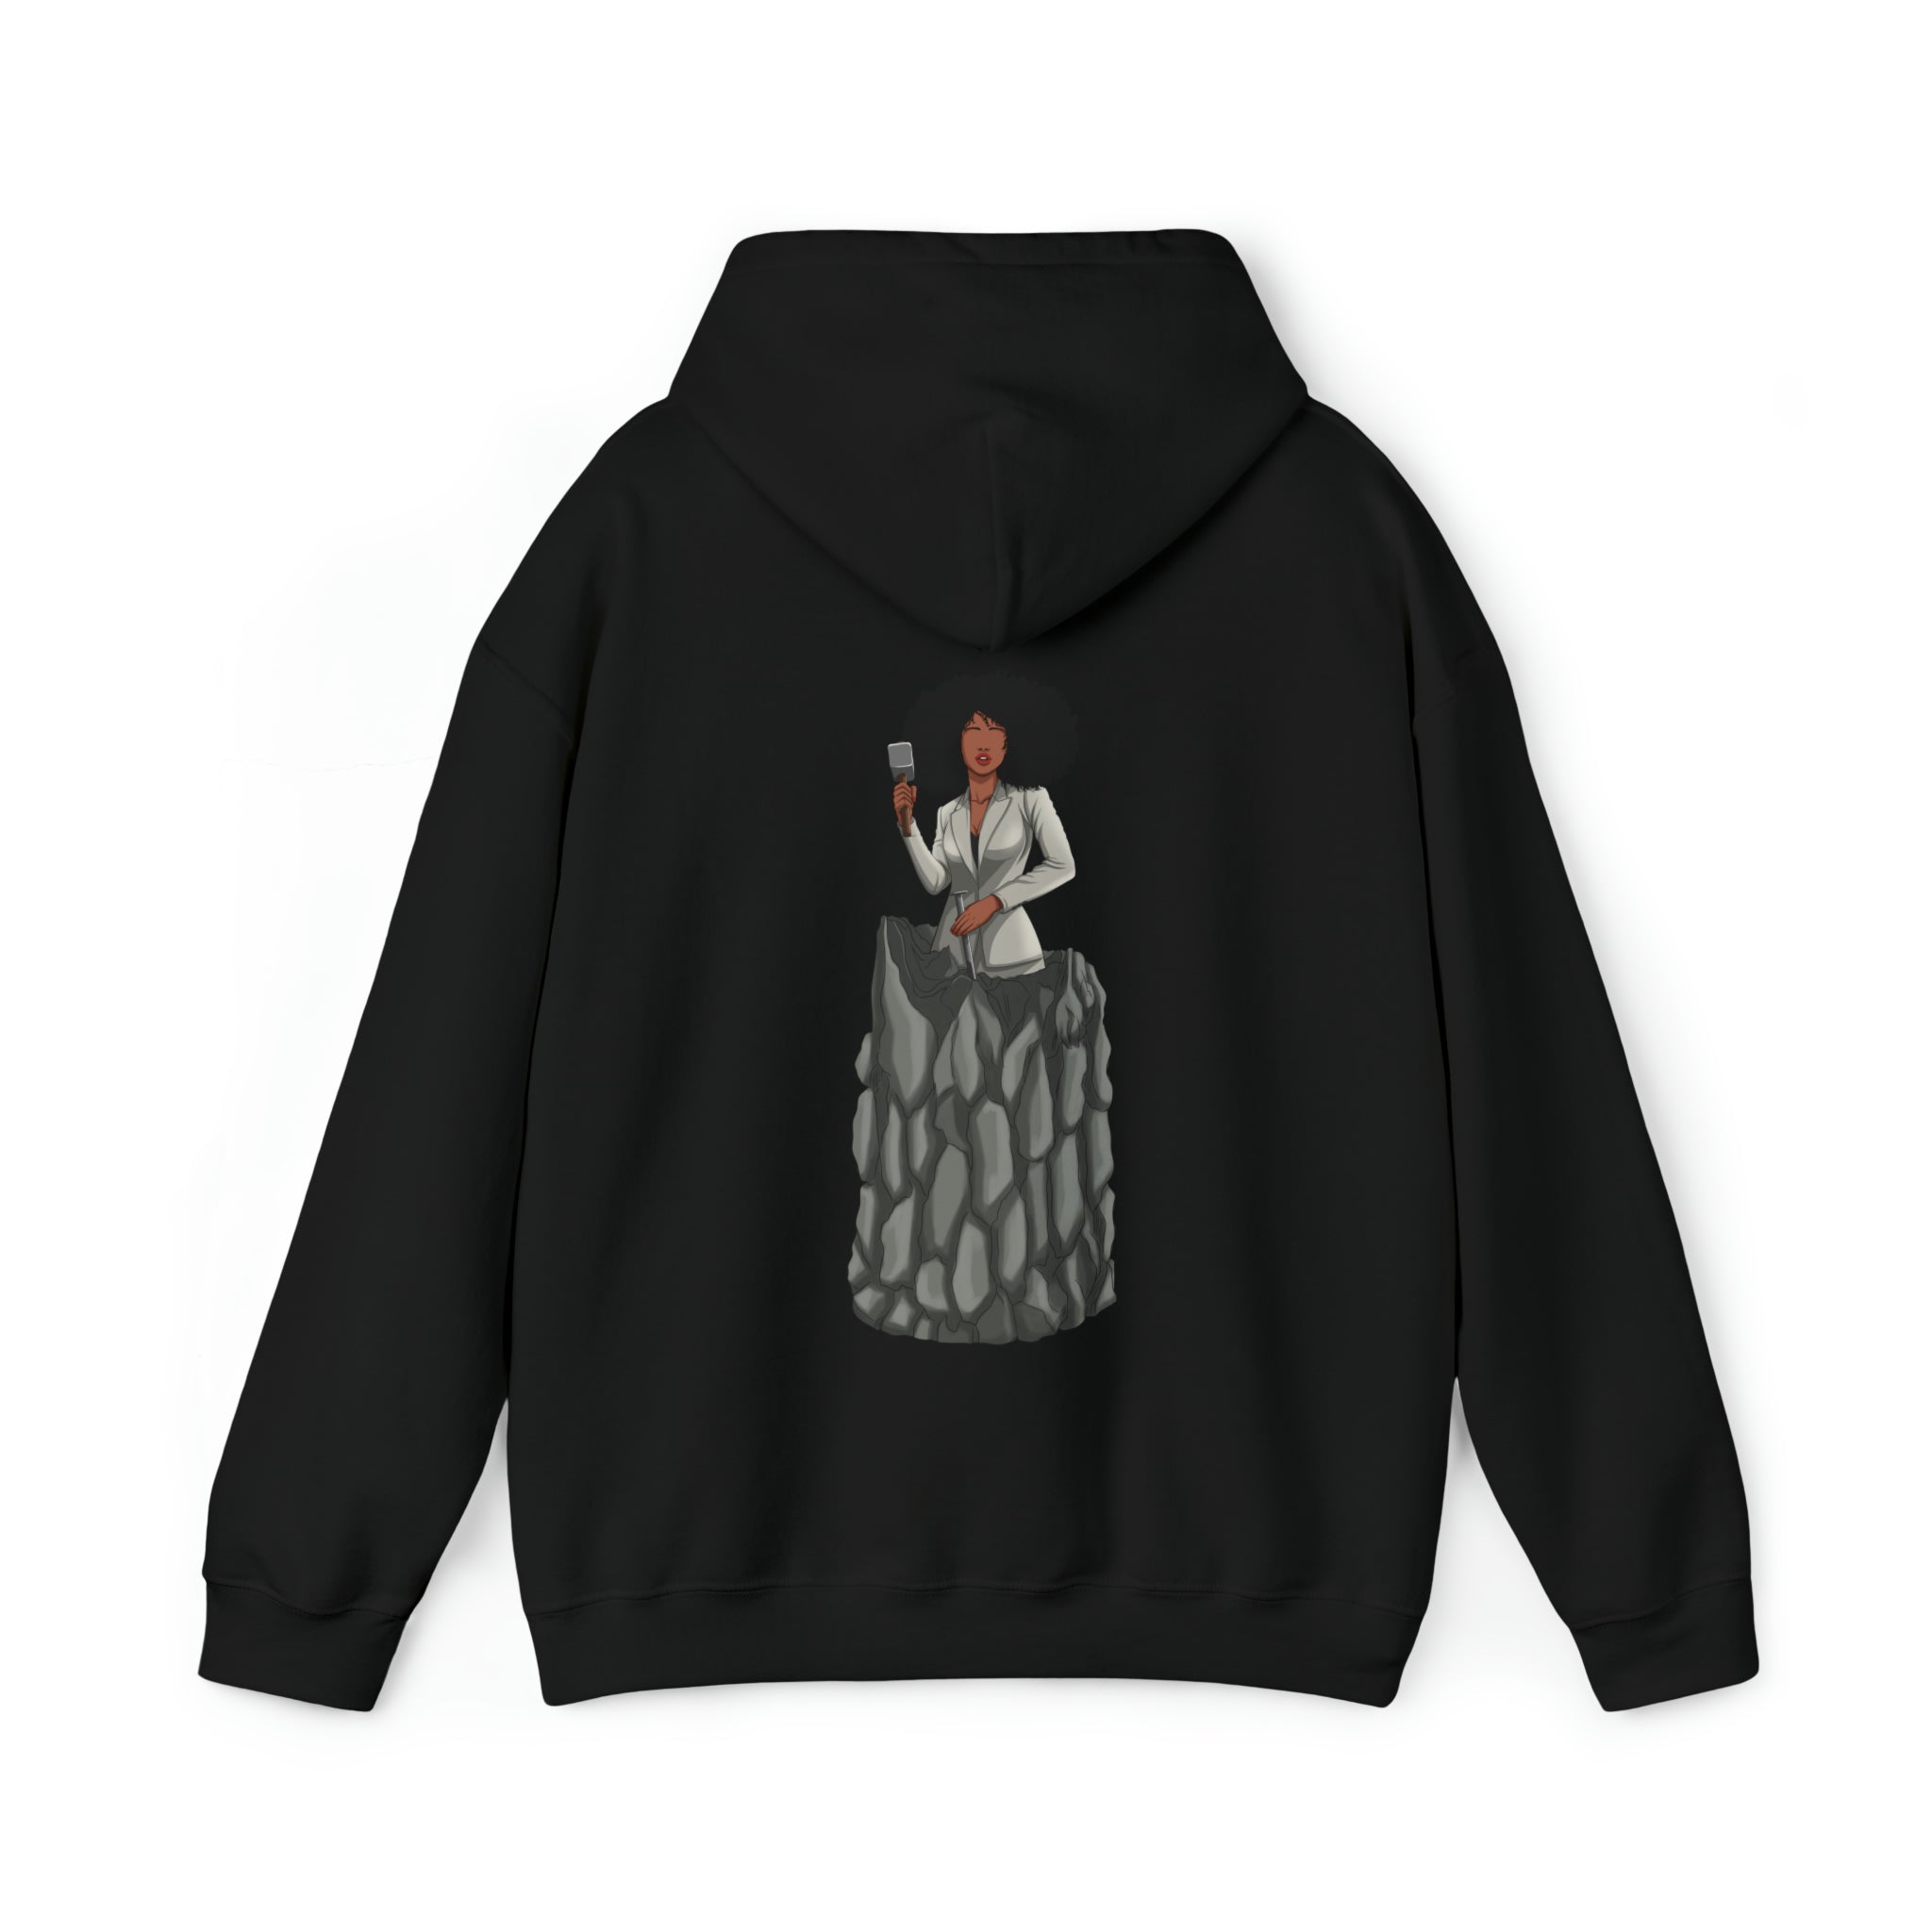 A person working hard to better his/herself - Heavy Blend™ Self-Made Hoodie - Woman #6